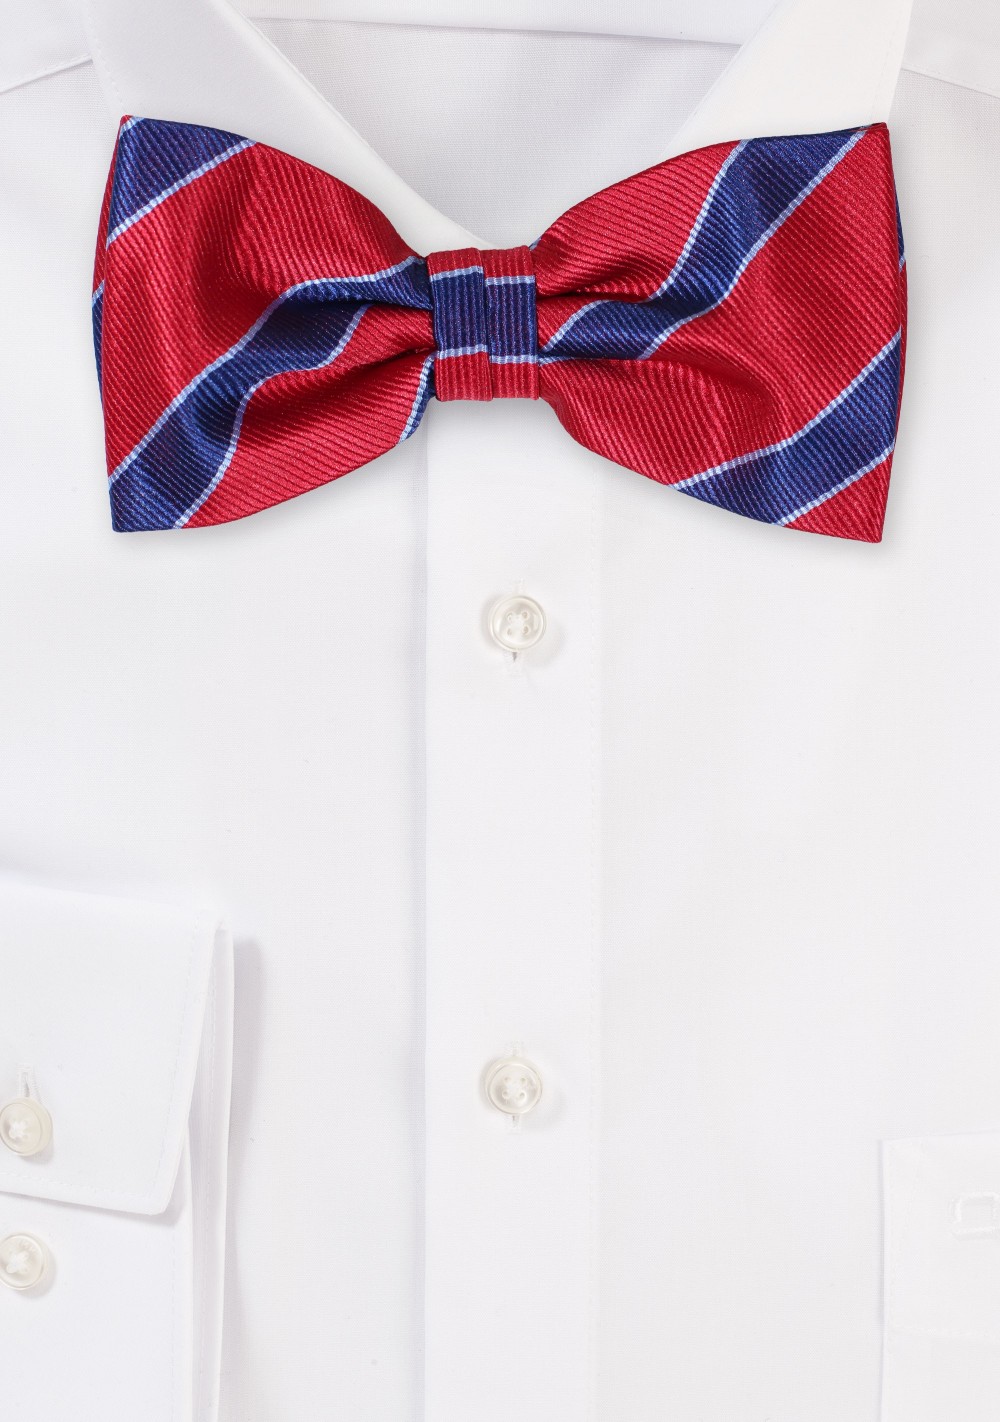 Cherry and Navy Striped Bowtie